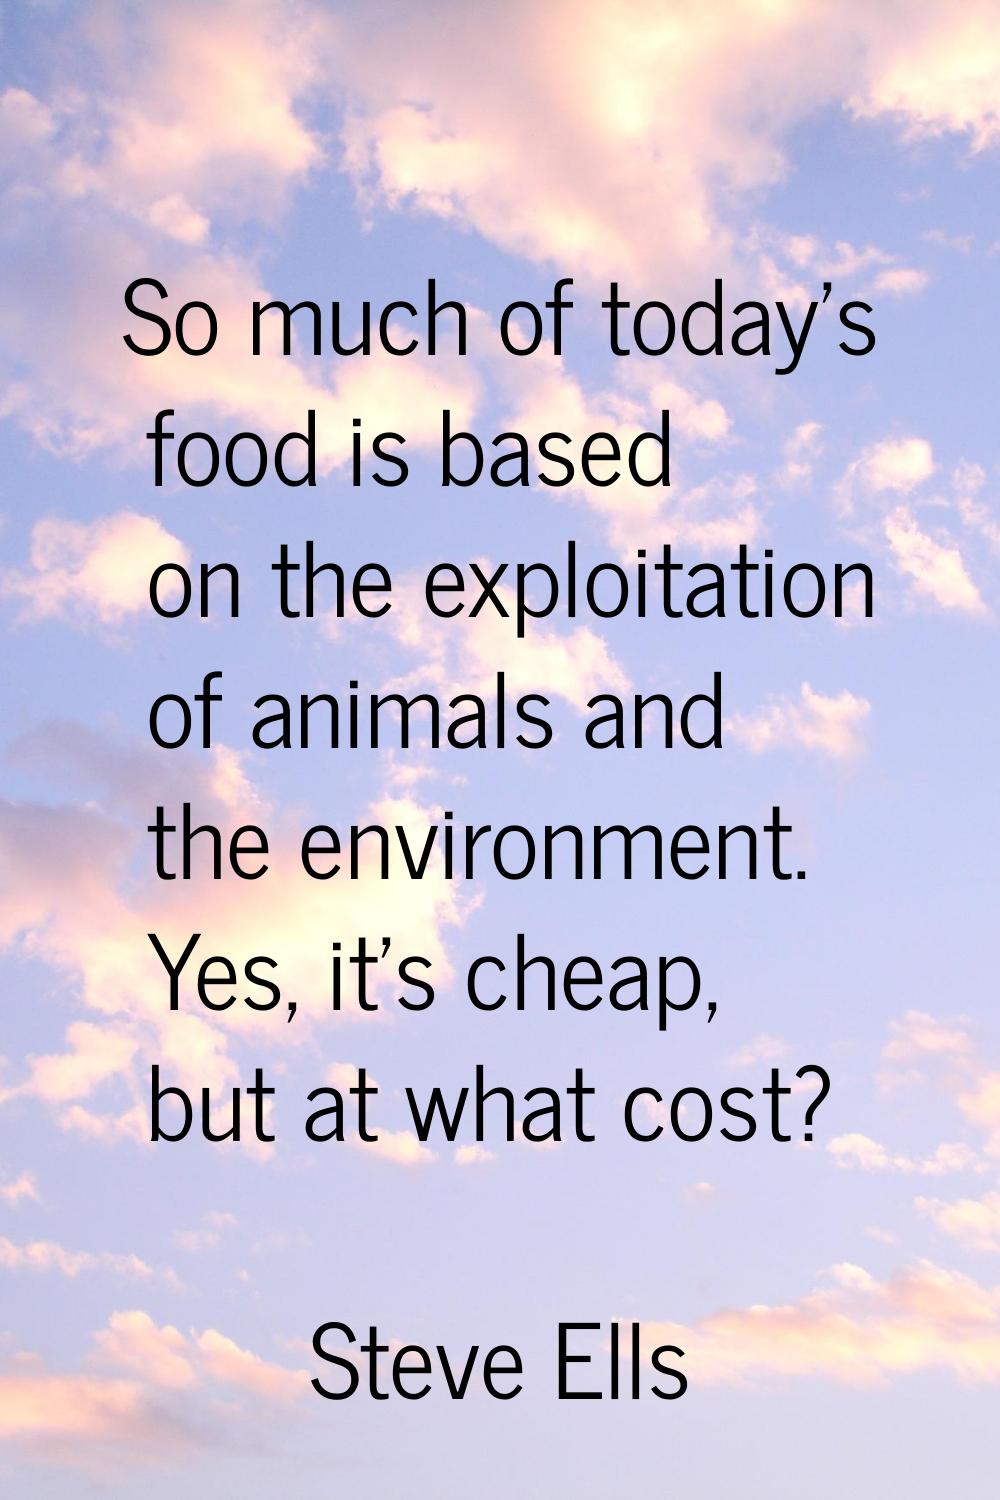 So much of today's food is based on the exploitation of animals and the environment. Yes, it's chea